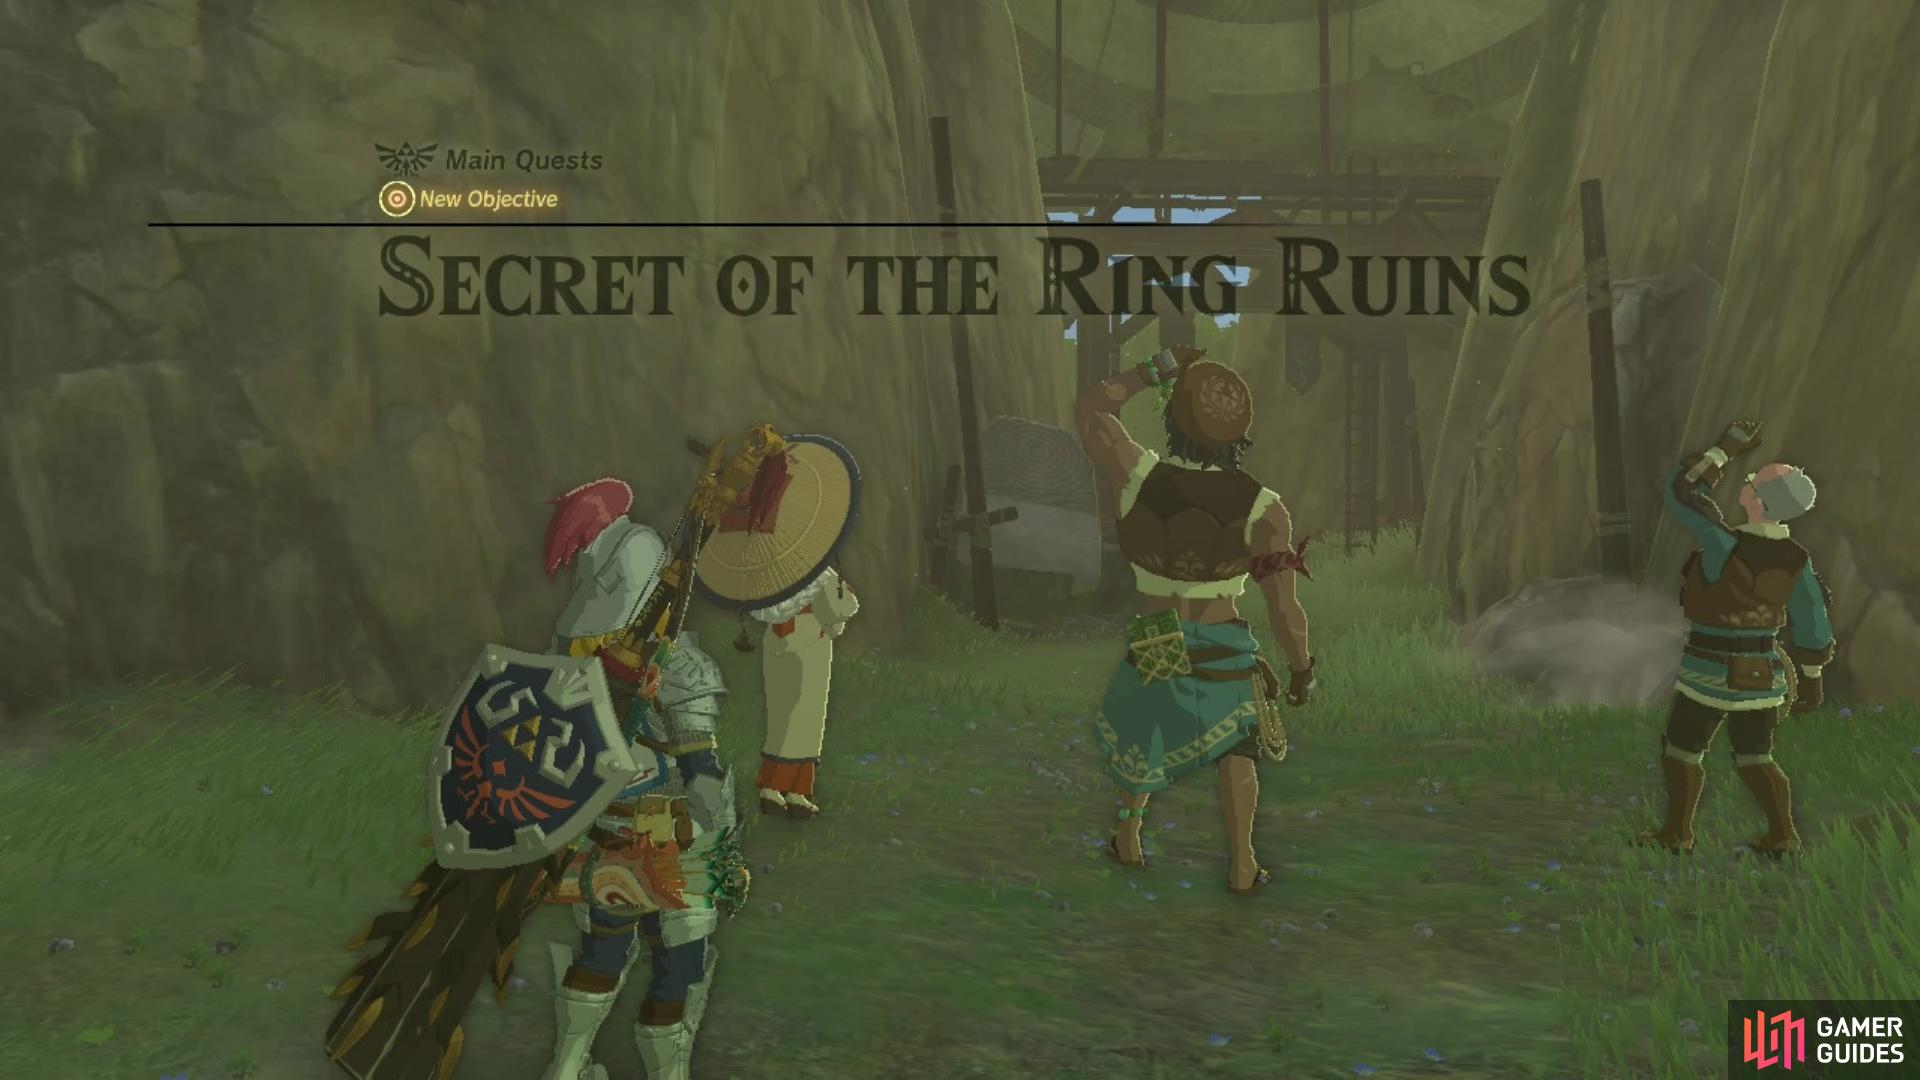 The Secret of the Ring Ruins is the beginning of the search for the . 